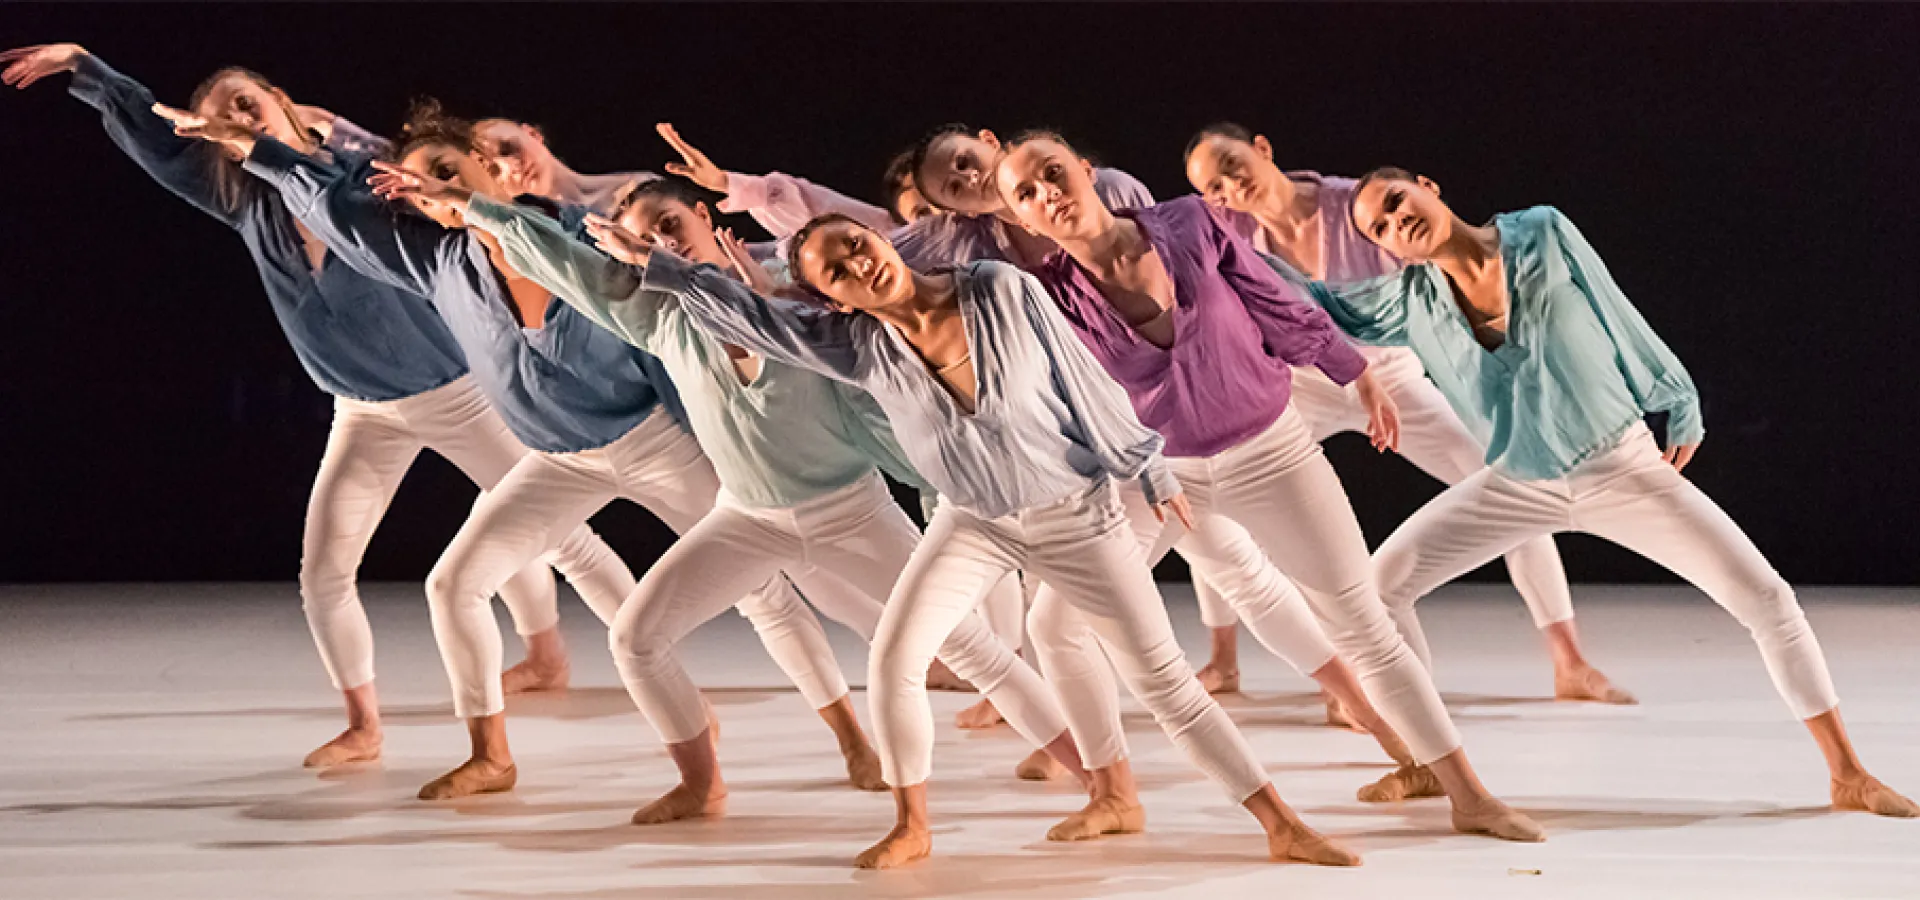 Group of dancers in white pants and differently colored tops